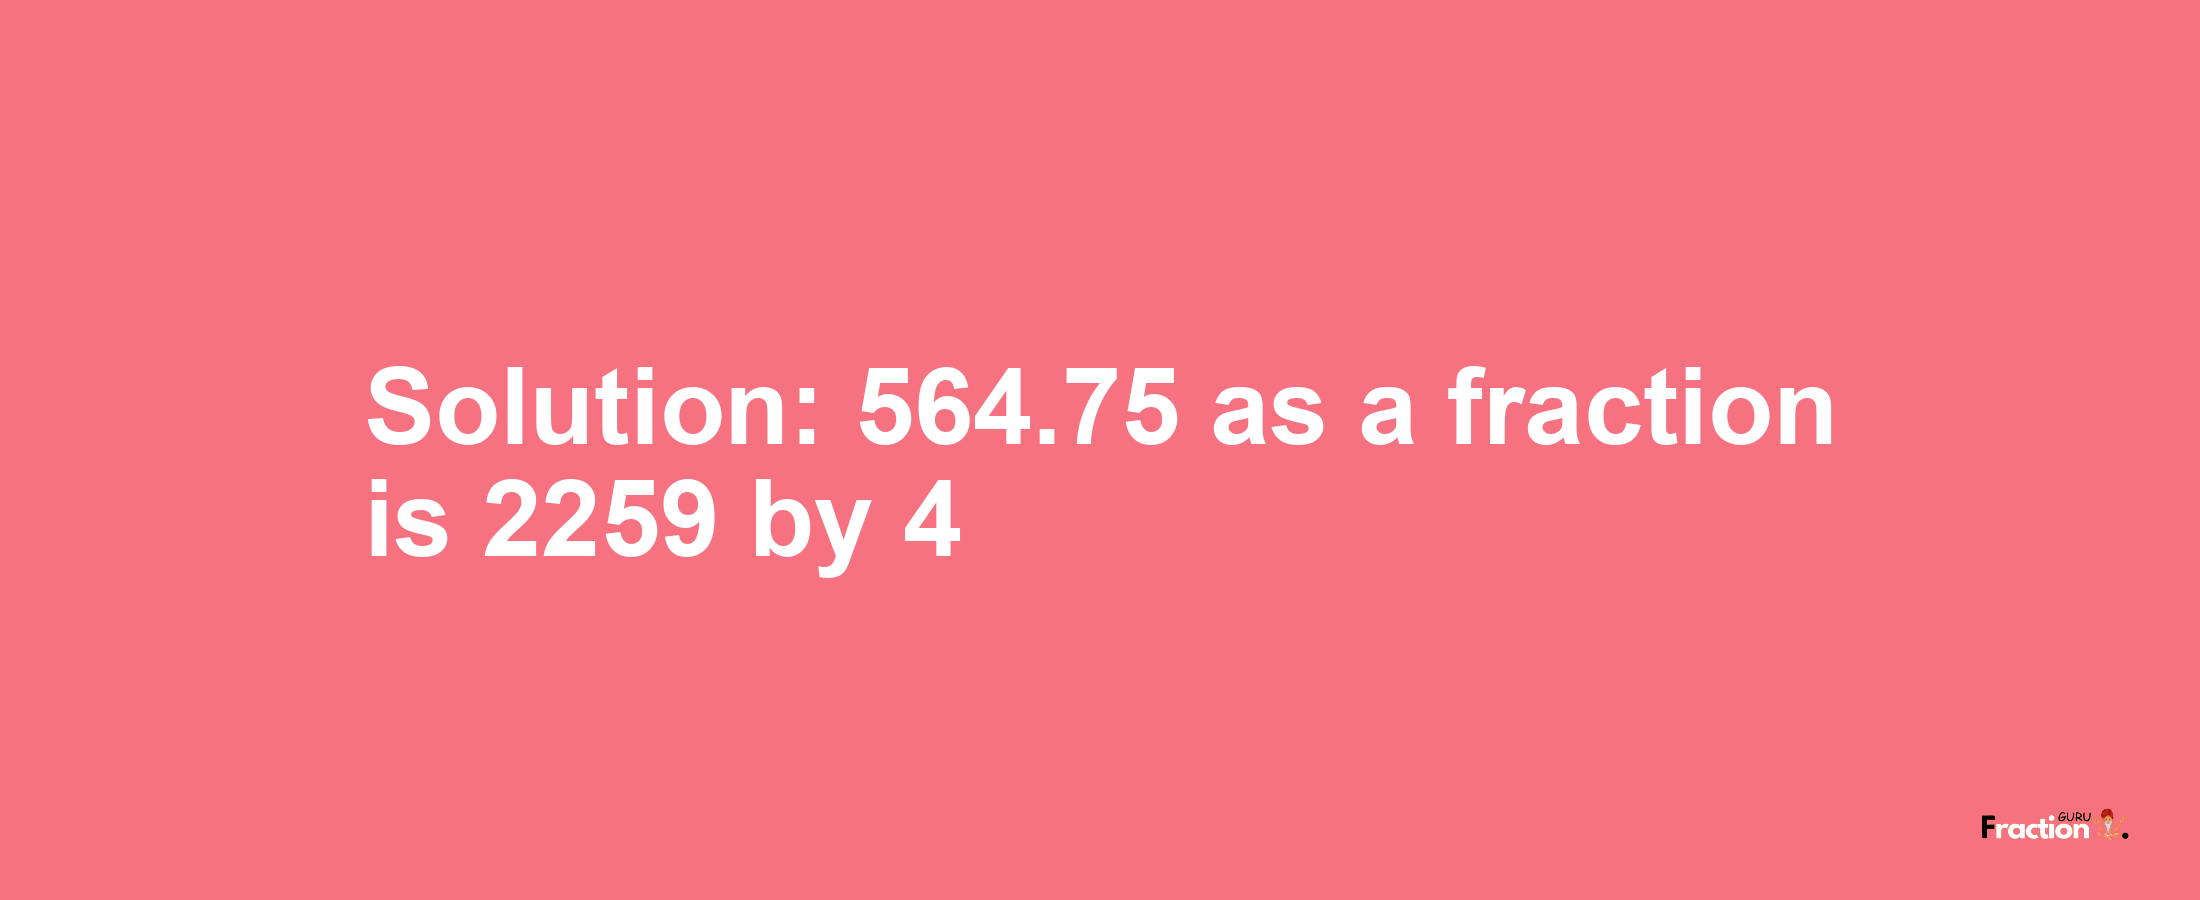 Solution:564.75 as a fraction is 2259/4